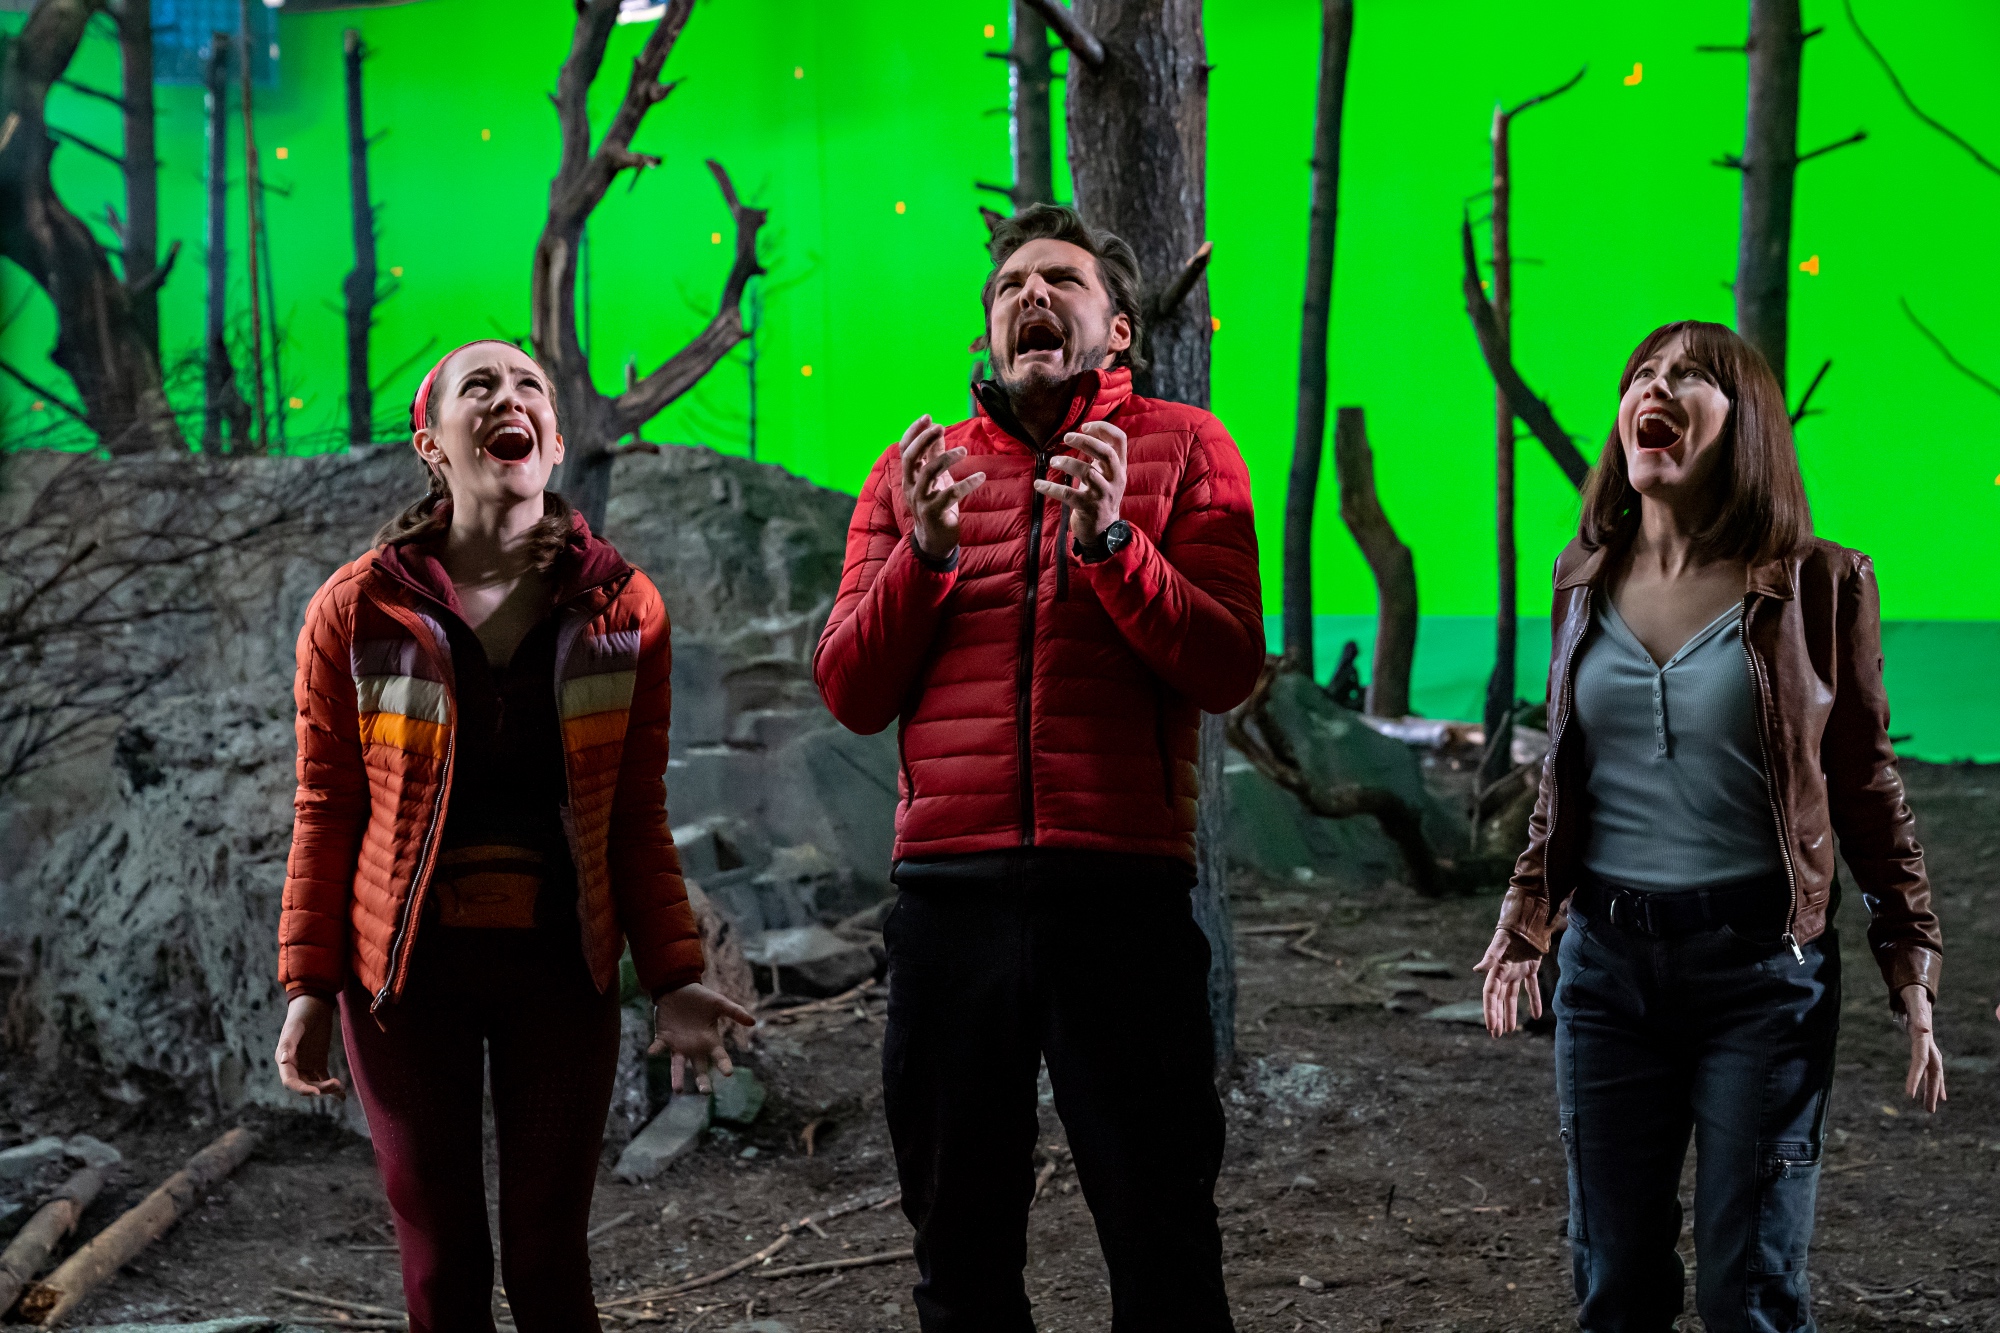 'The Bubble' cast Iris Apatow as Krystal Kris, Pedro Pascal as Dieter Bravo, and Leslie Mann as Lauren Van Chance screaming on a forest movie set with a green screen behind them